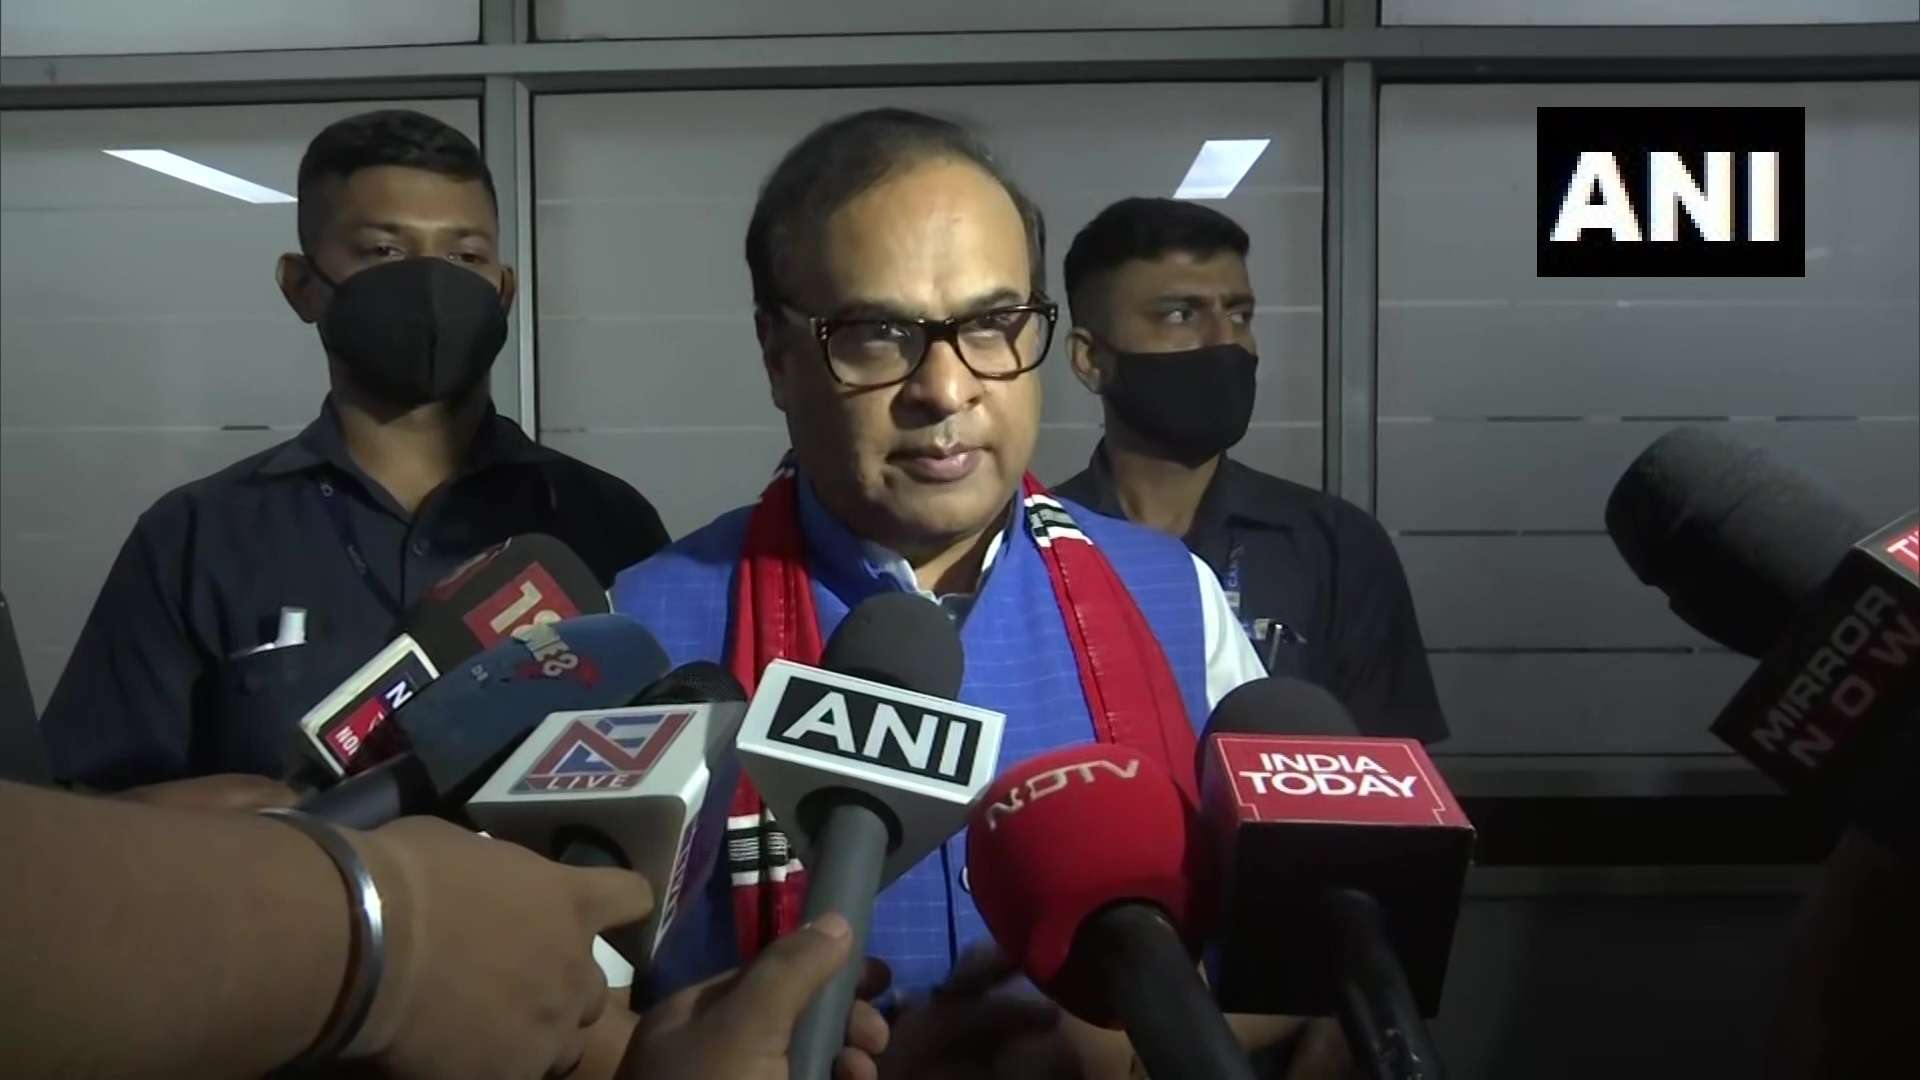 The Assam CM, who has been charged with criminal conspiracy and attempt to murder in an FIR by Mizoram Police, also spoke of keeping alive the spirit of the northeast. (ANI Photo)